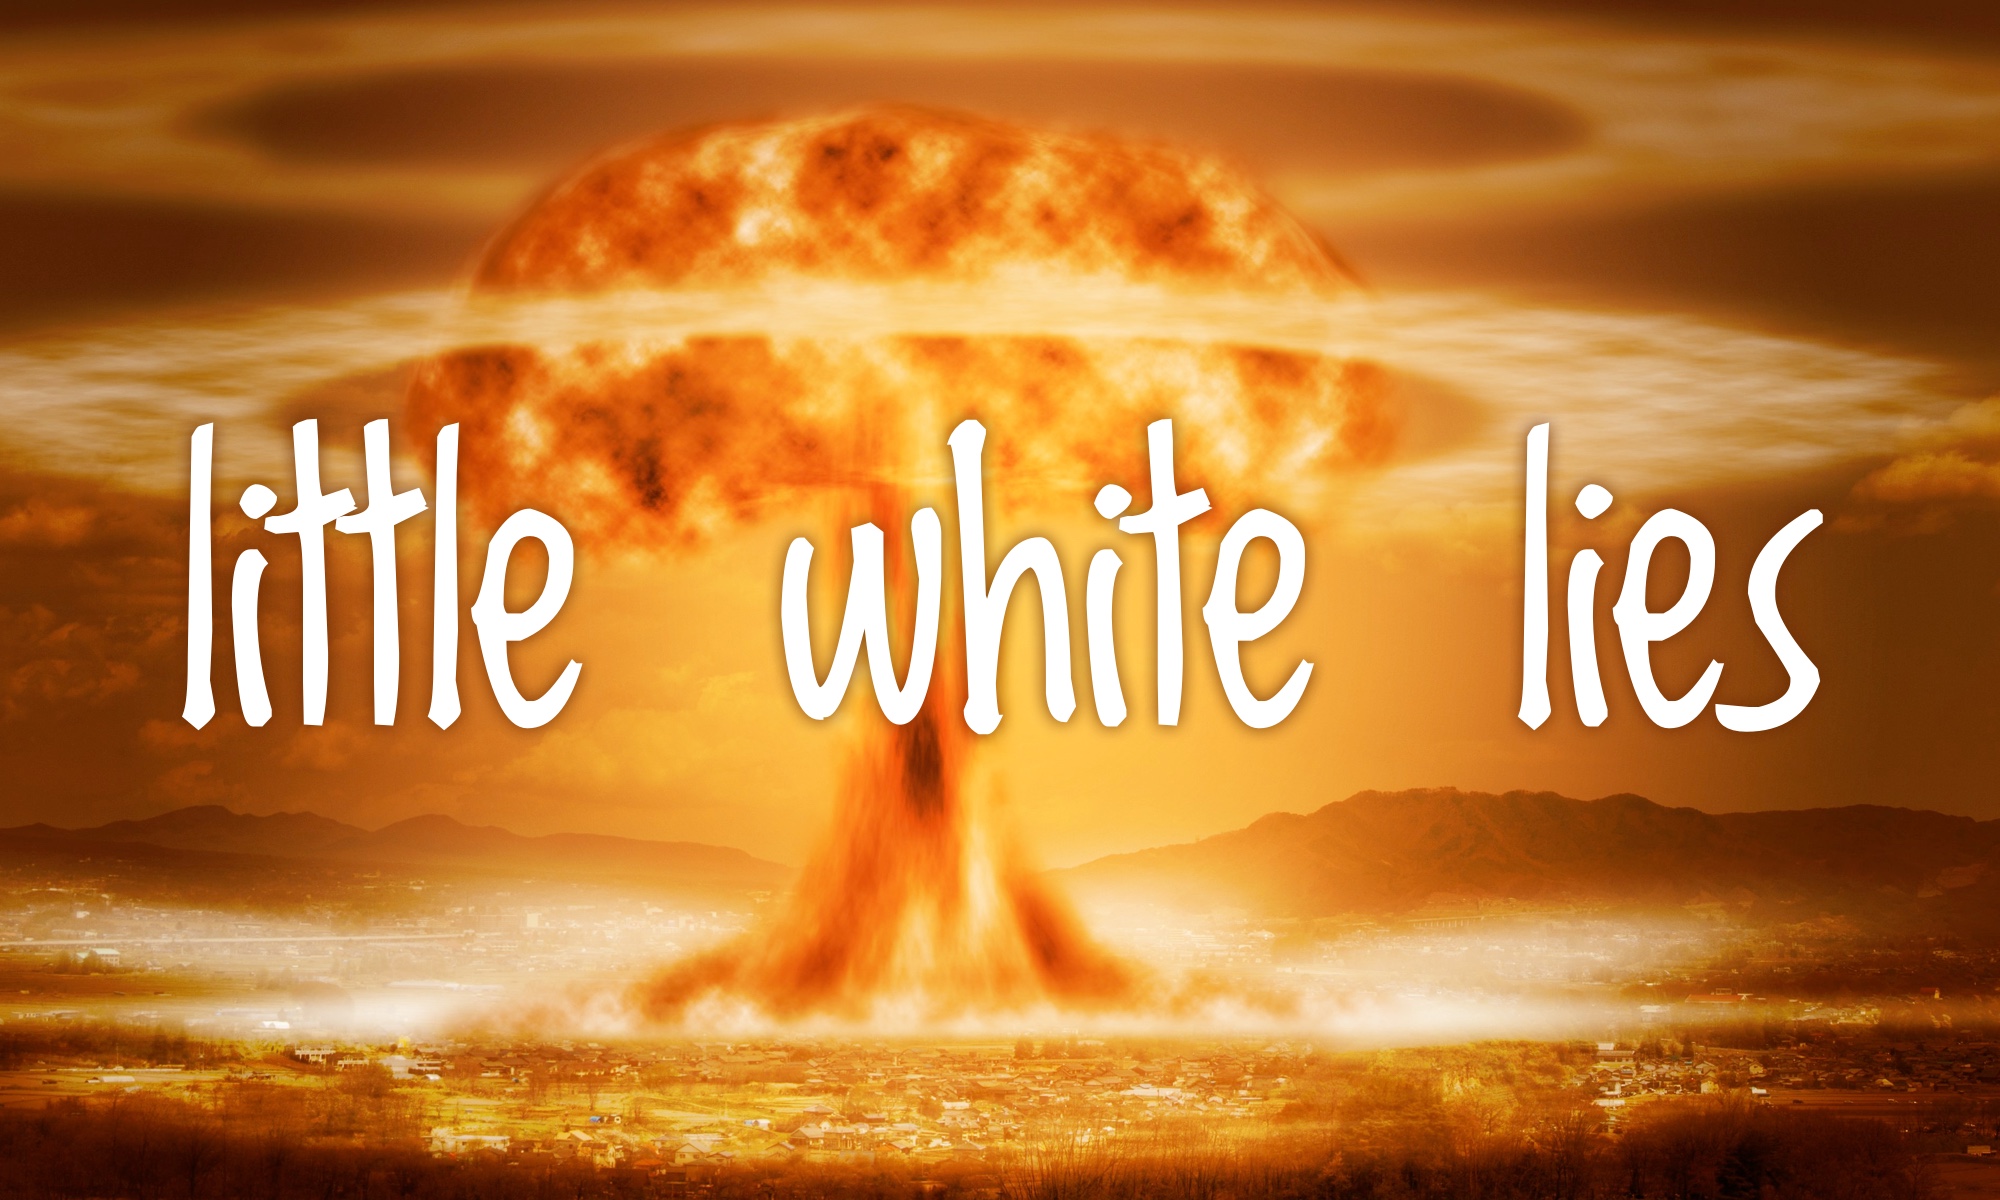 The words "little white lies" in white overlaying a mushroom cloud.